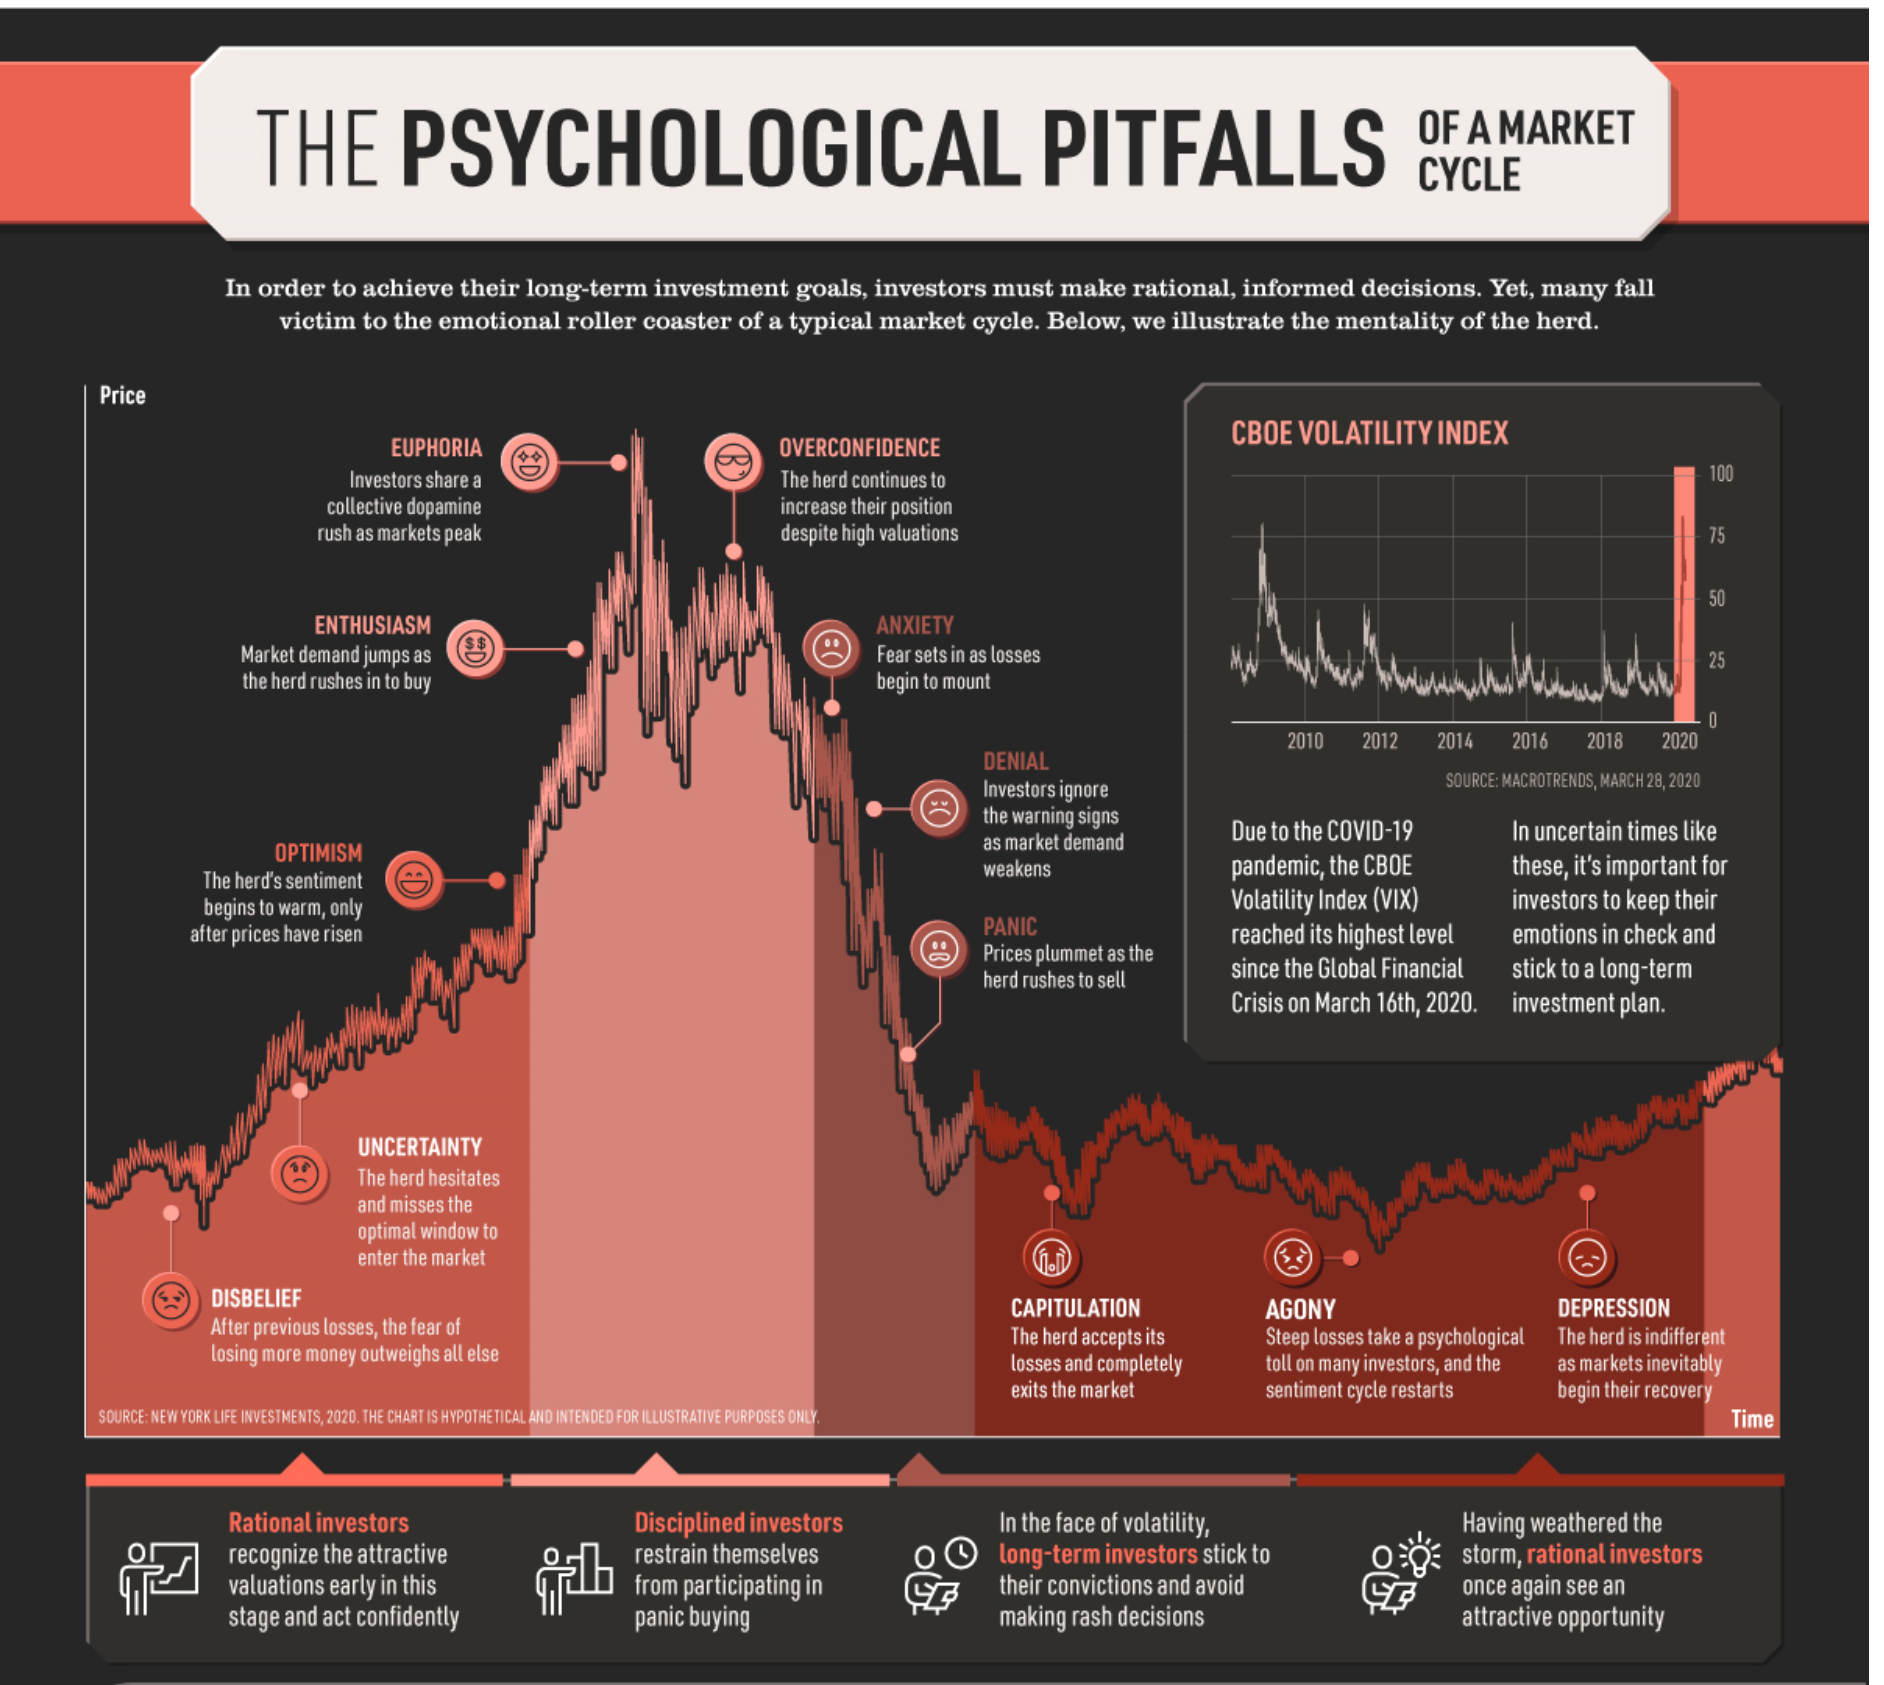 The chart shows investor psychology during market phases.